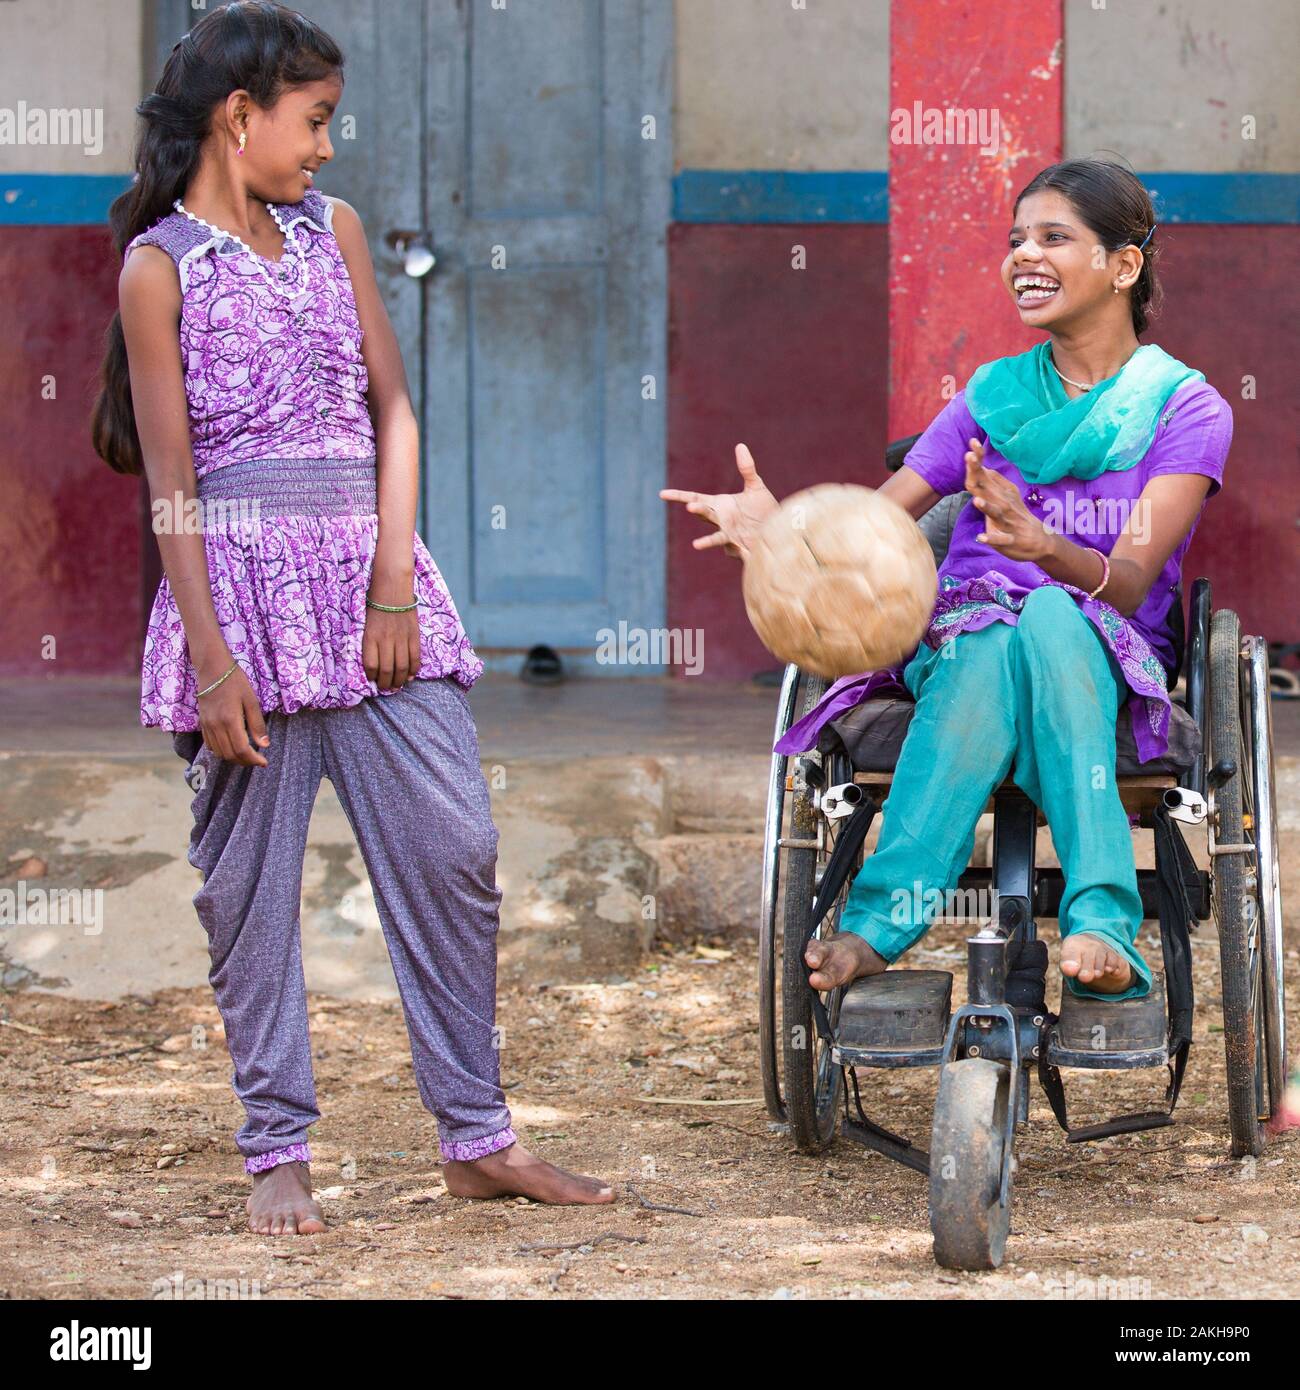 CAPTION: Shilpa, who has cerebral palsy and moves around in a wheelchair, has developed her confidence level dramatically since joining her local Afte Stock Photo